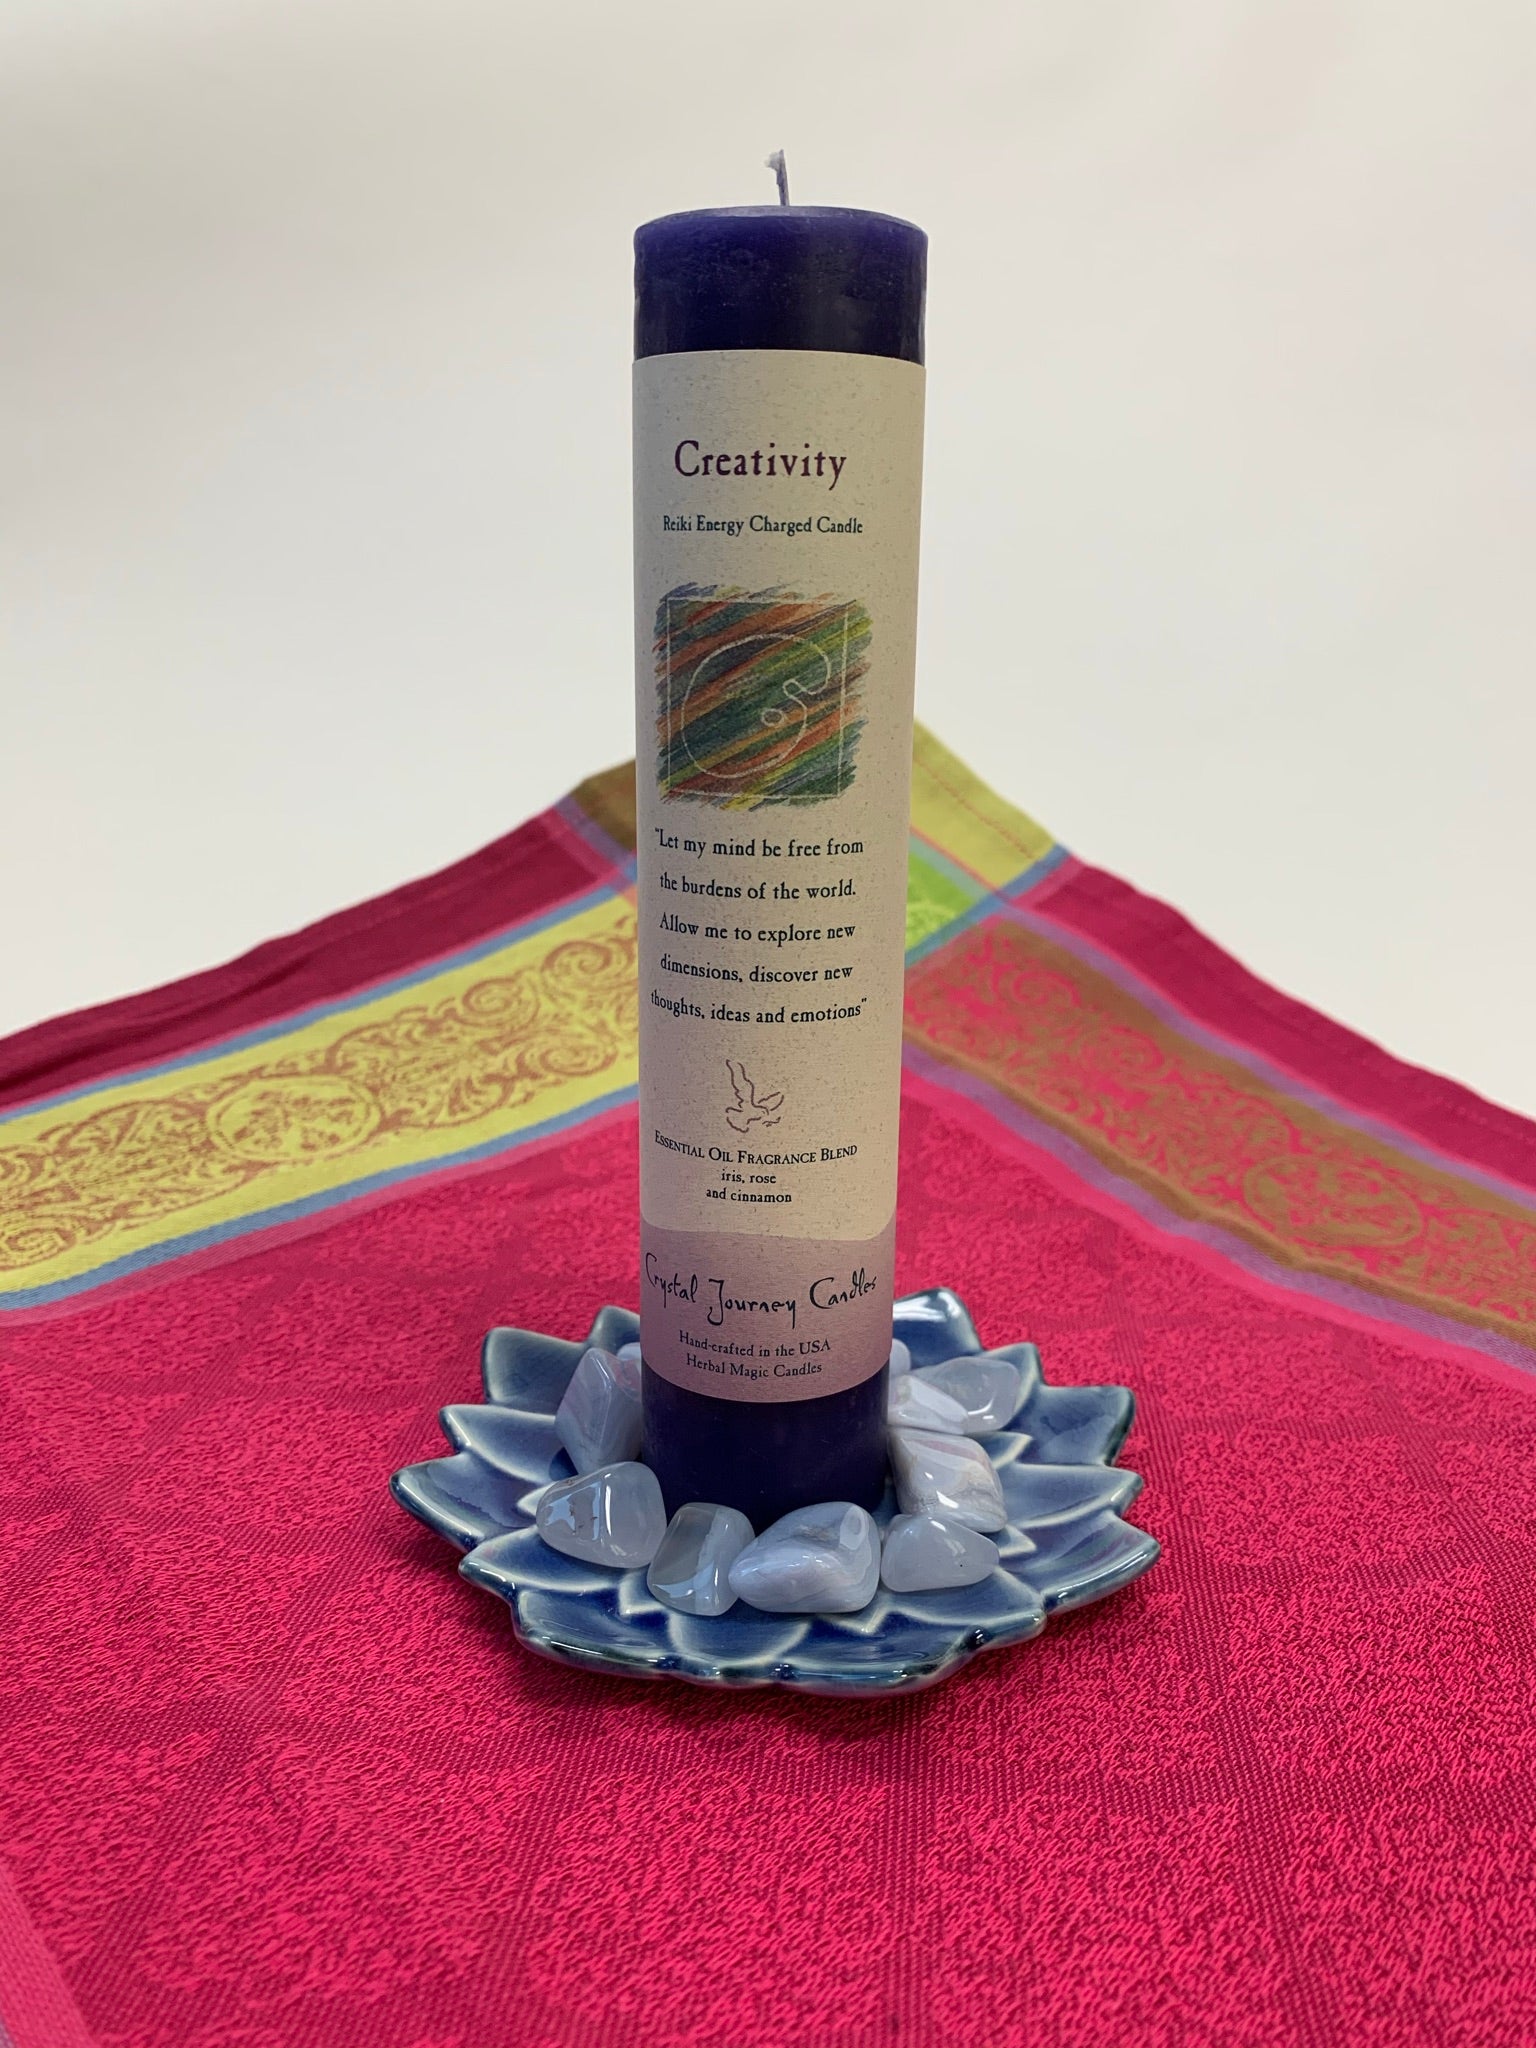 Reiki-charged pillar candle for "creativity." It is handcrafted and scented using essential oils. An affirmation/prayer is printed on the label, as well as a listing of the essential oils used (iris, rose & cinnamon). It is approximately 7"x2½." Perfect for Meditation, prayer, visualization or quiet time. This dark blue candle and its label are both visually appealing. 